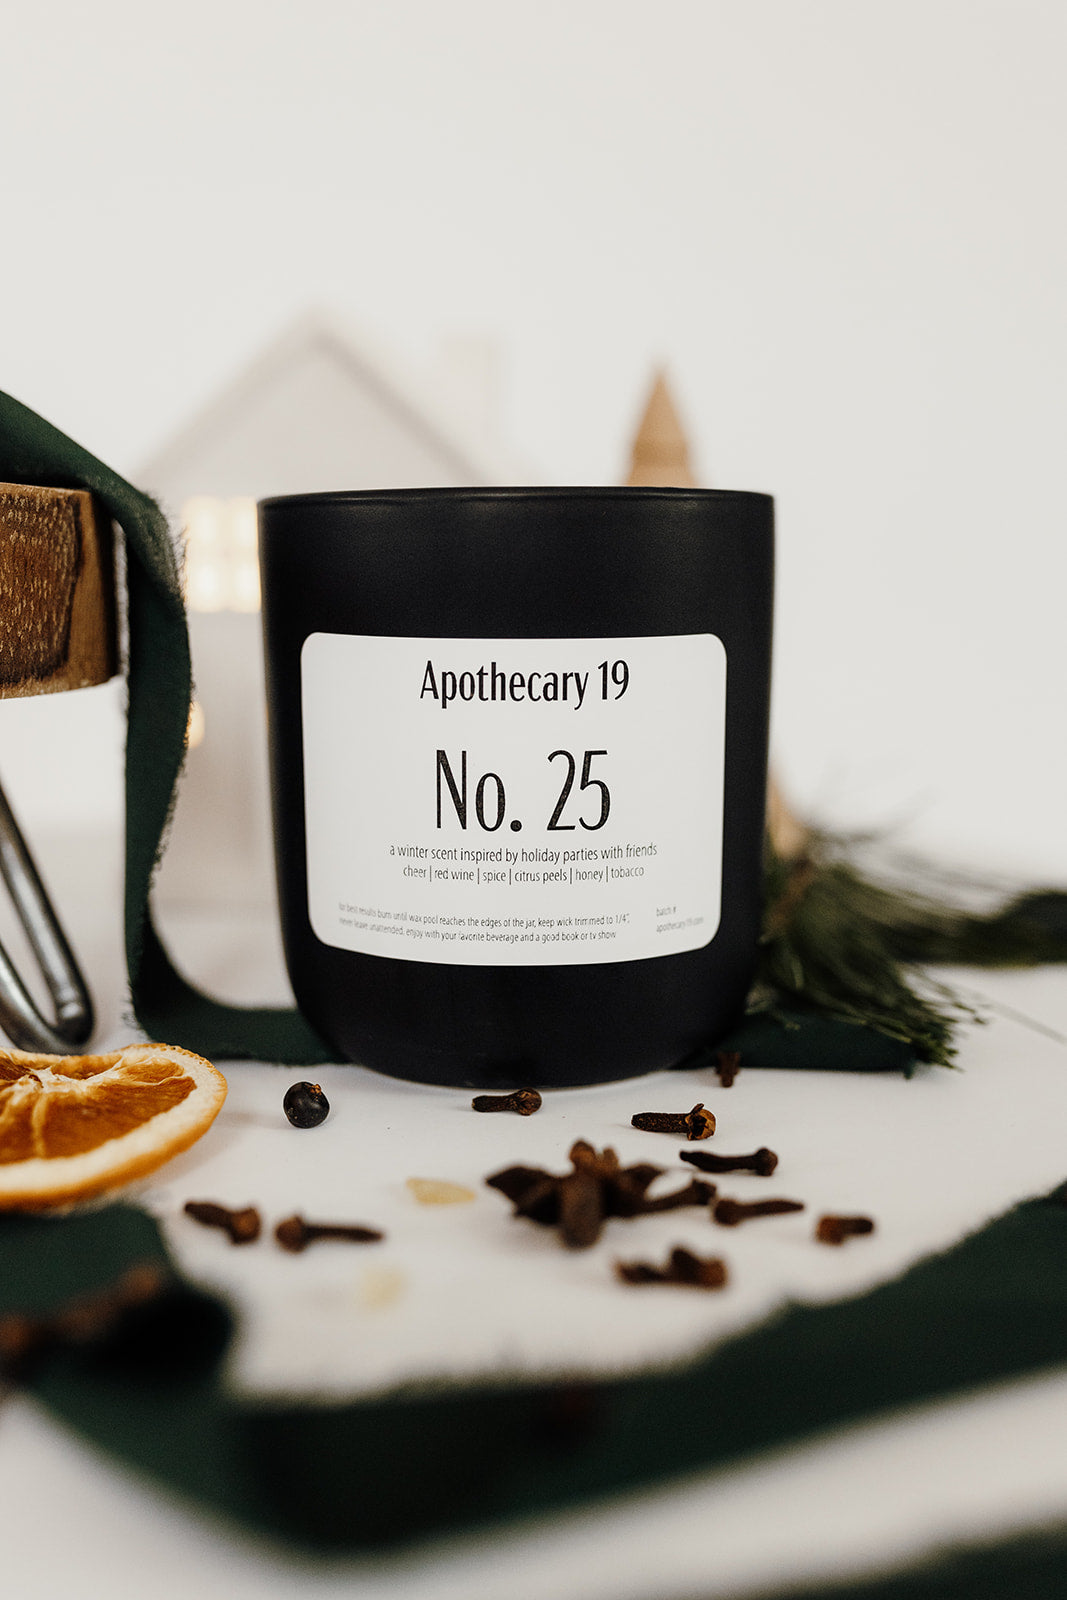 No. 25 - a winter scent inspired by holiday parties with friends